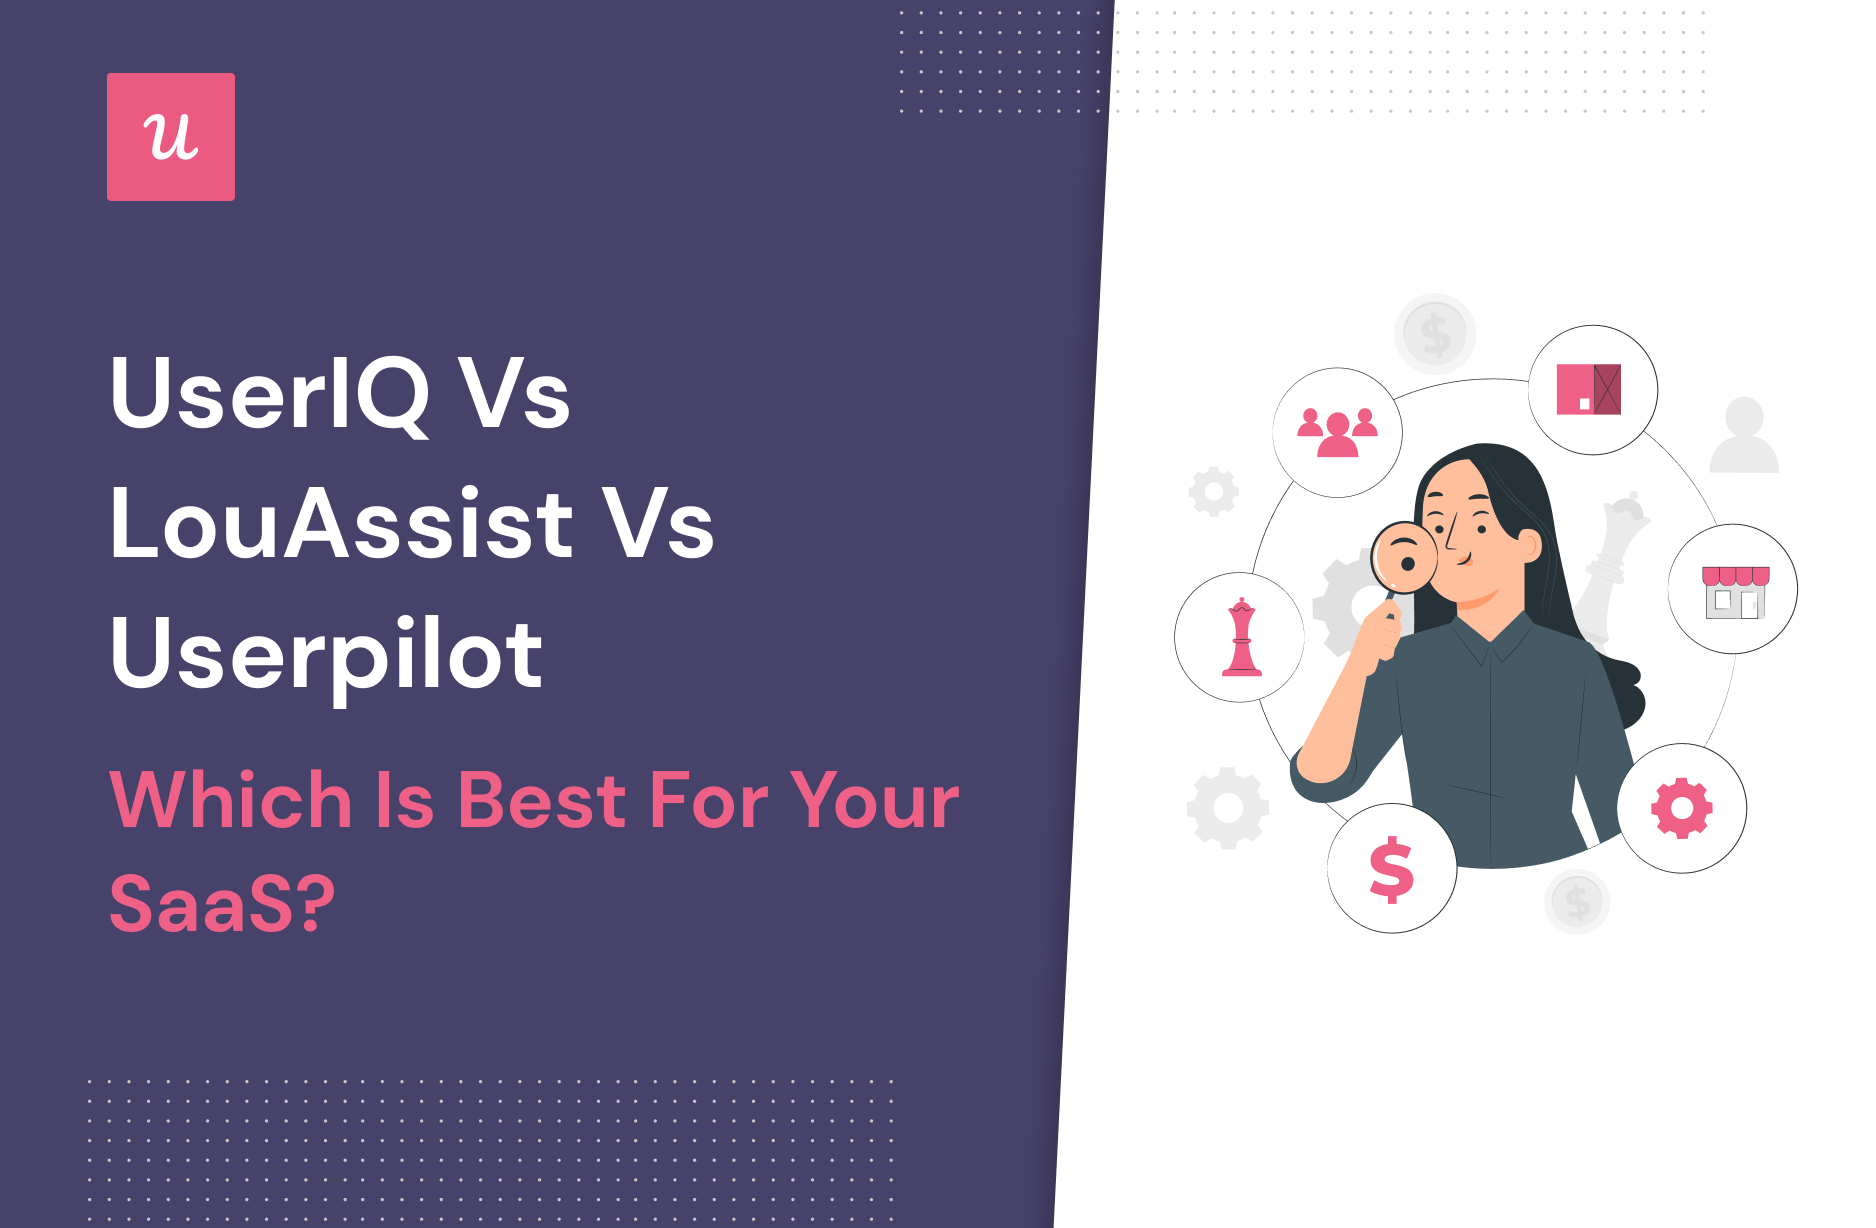 UserIQ vs LouAssist vs Userpilot – Which is Best for Your SaaS